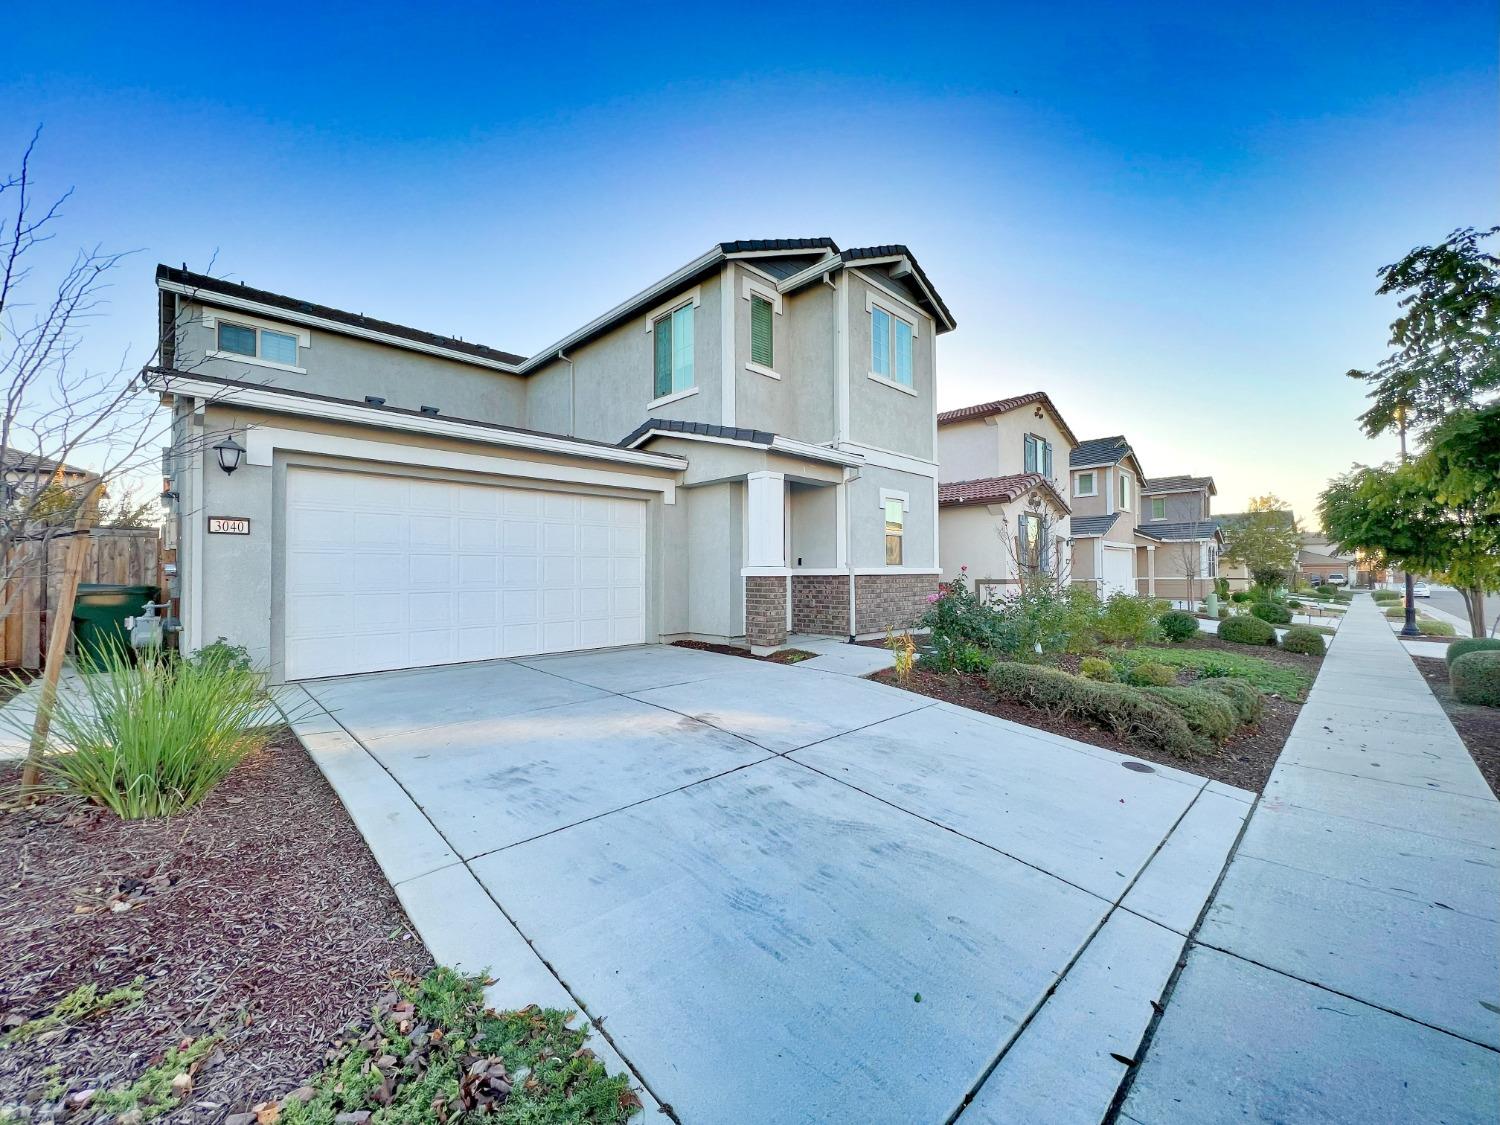 Photo of 3040 Mansfield St in Roseville, CA